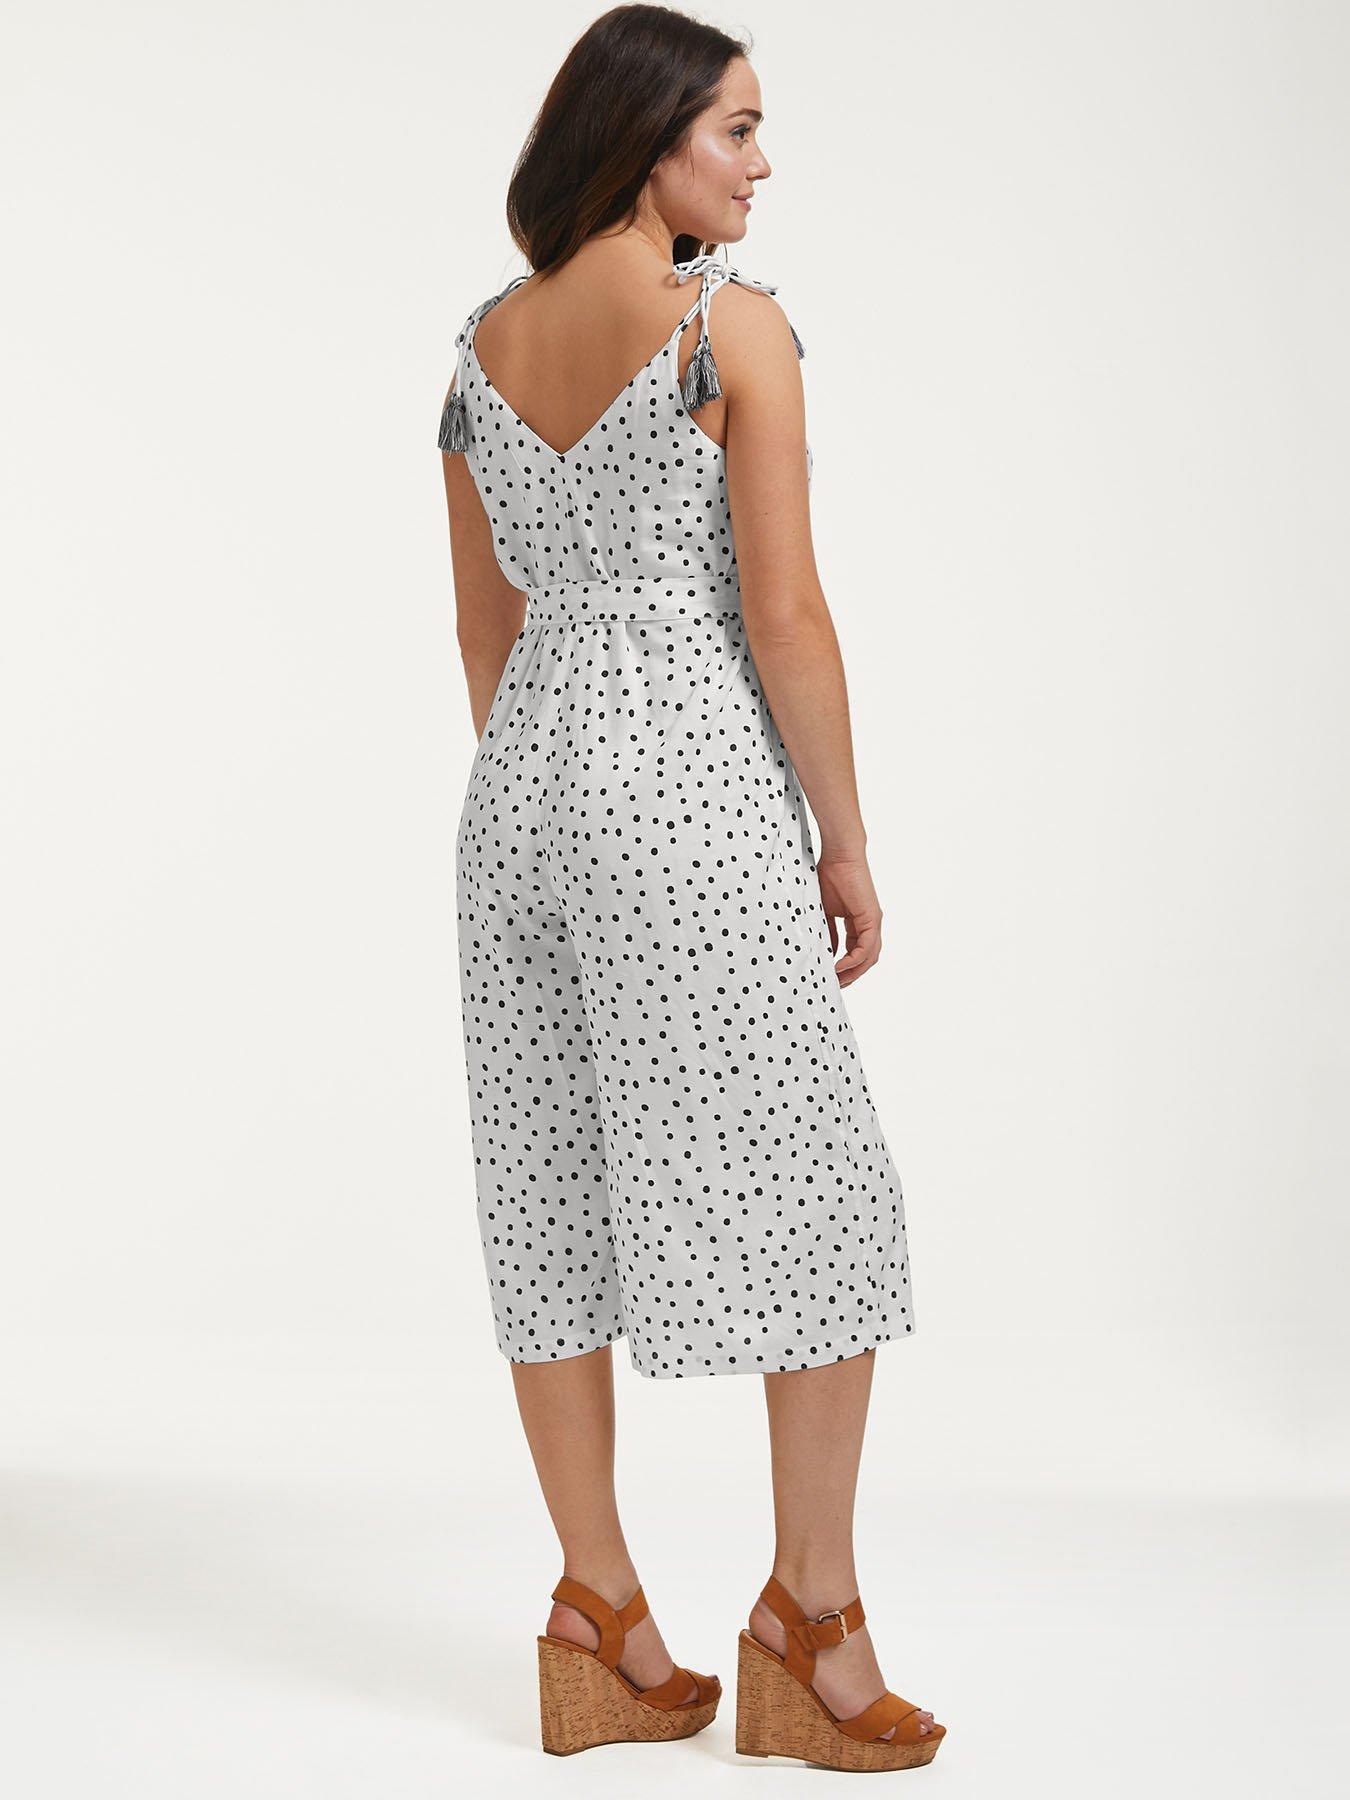 Figleaves Strappy Culotte Polka Dot Jumpsuit Black White Very Co Uk